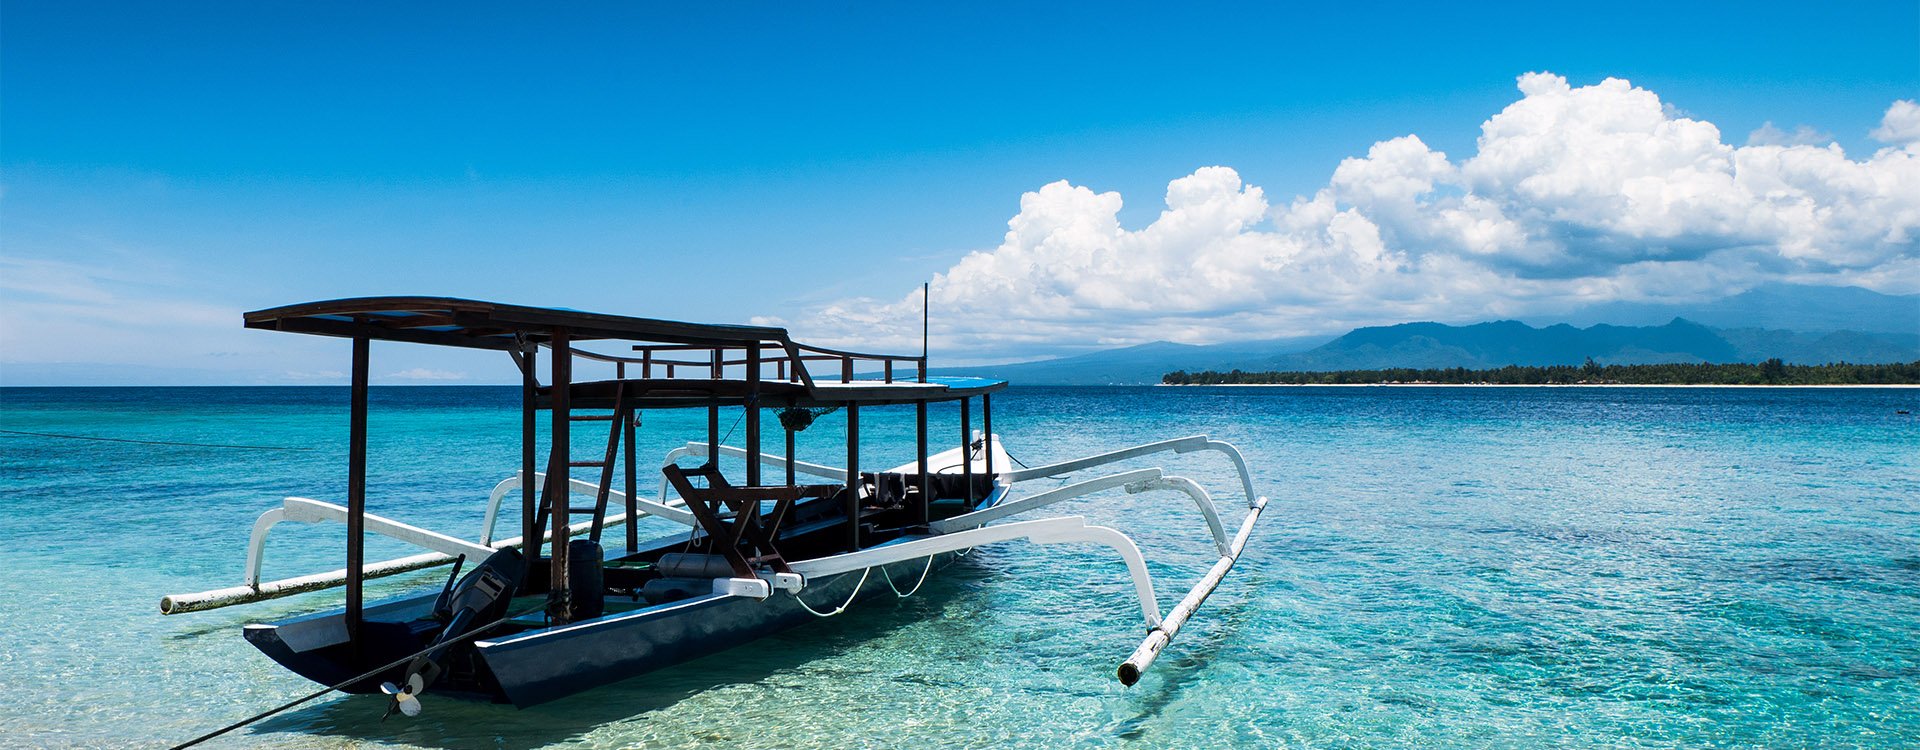 Boats moored on clear ocean waters at Gili Meno of Lombok, Indonesia, Asia